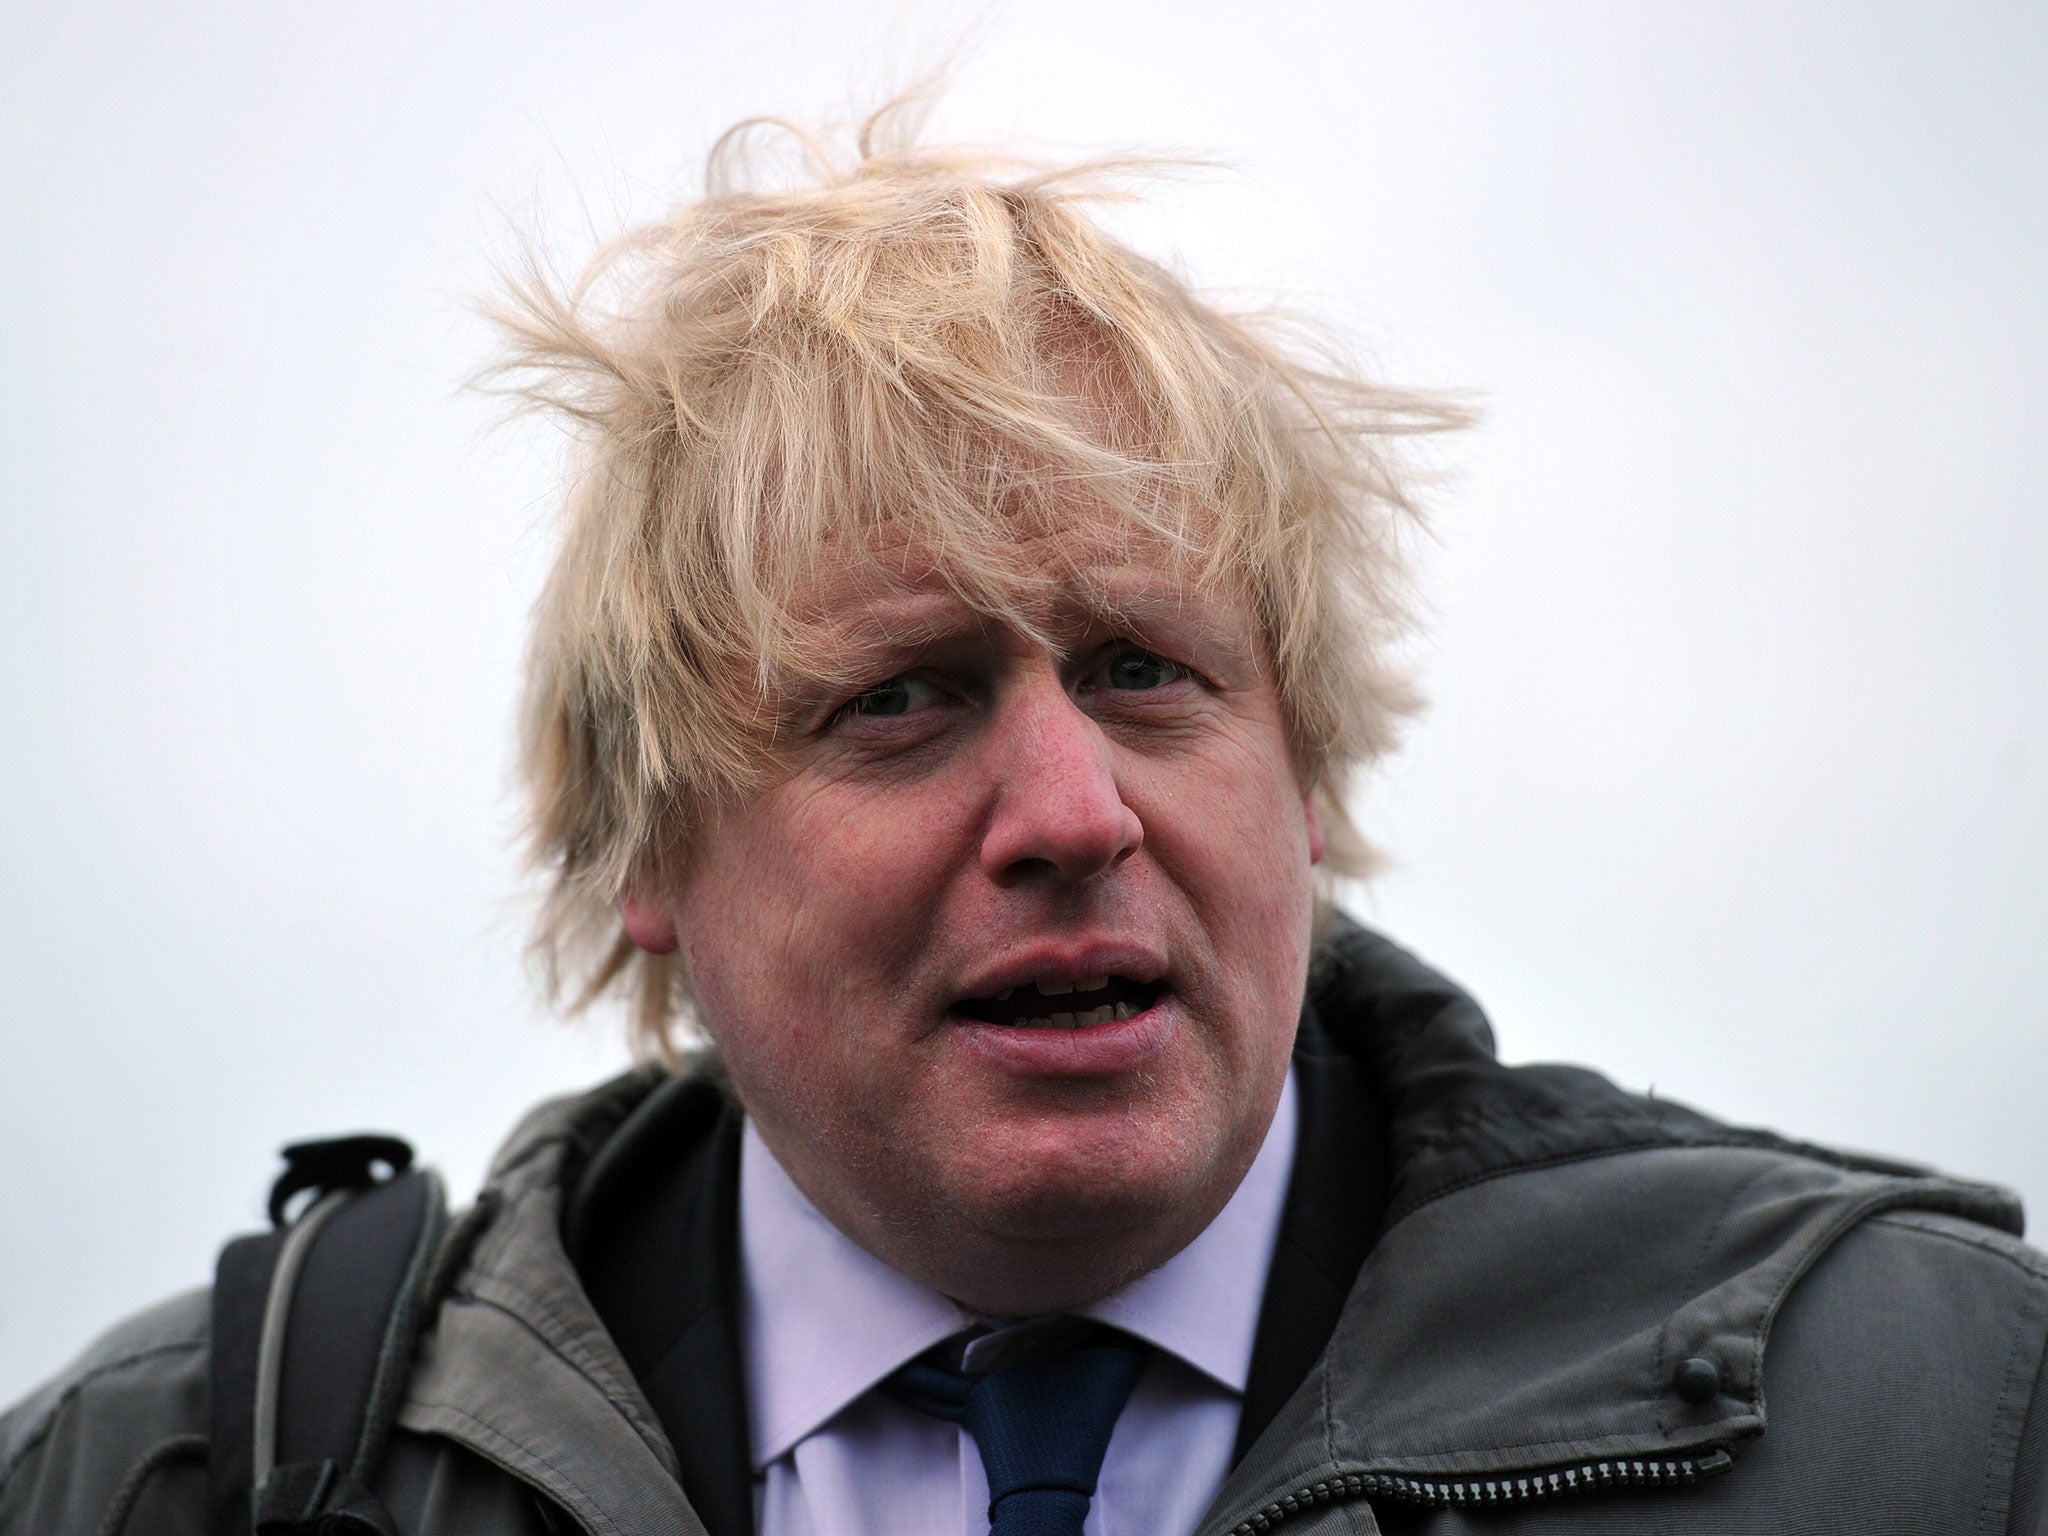 Boris Johnson has intensified pressure on David Cameron over Europe as he prepared to launch his bid to return to Westminster at next year’s general election